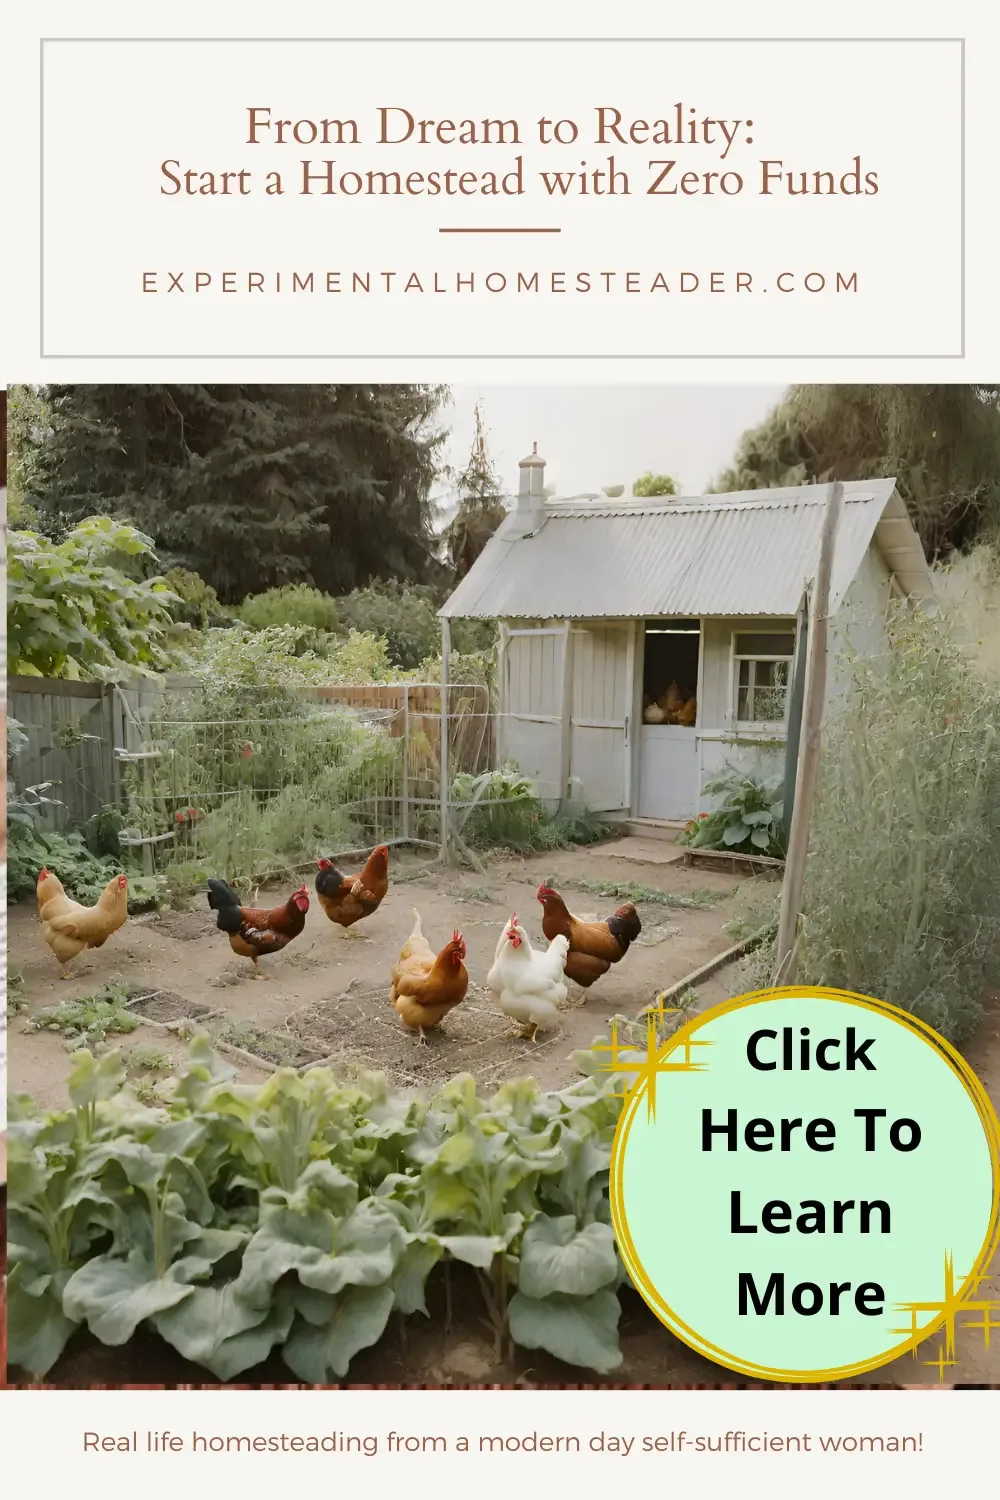 A small Kitchen garden on a homestead property with chickens close by